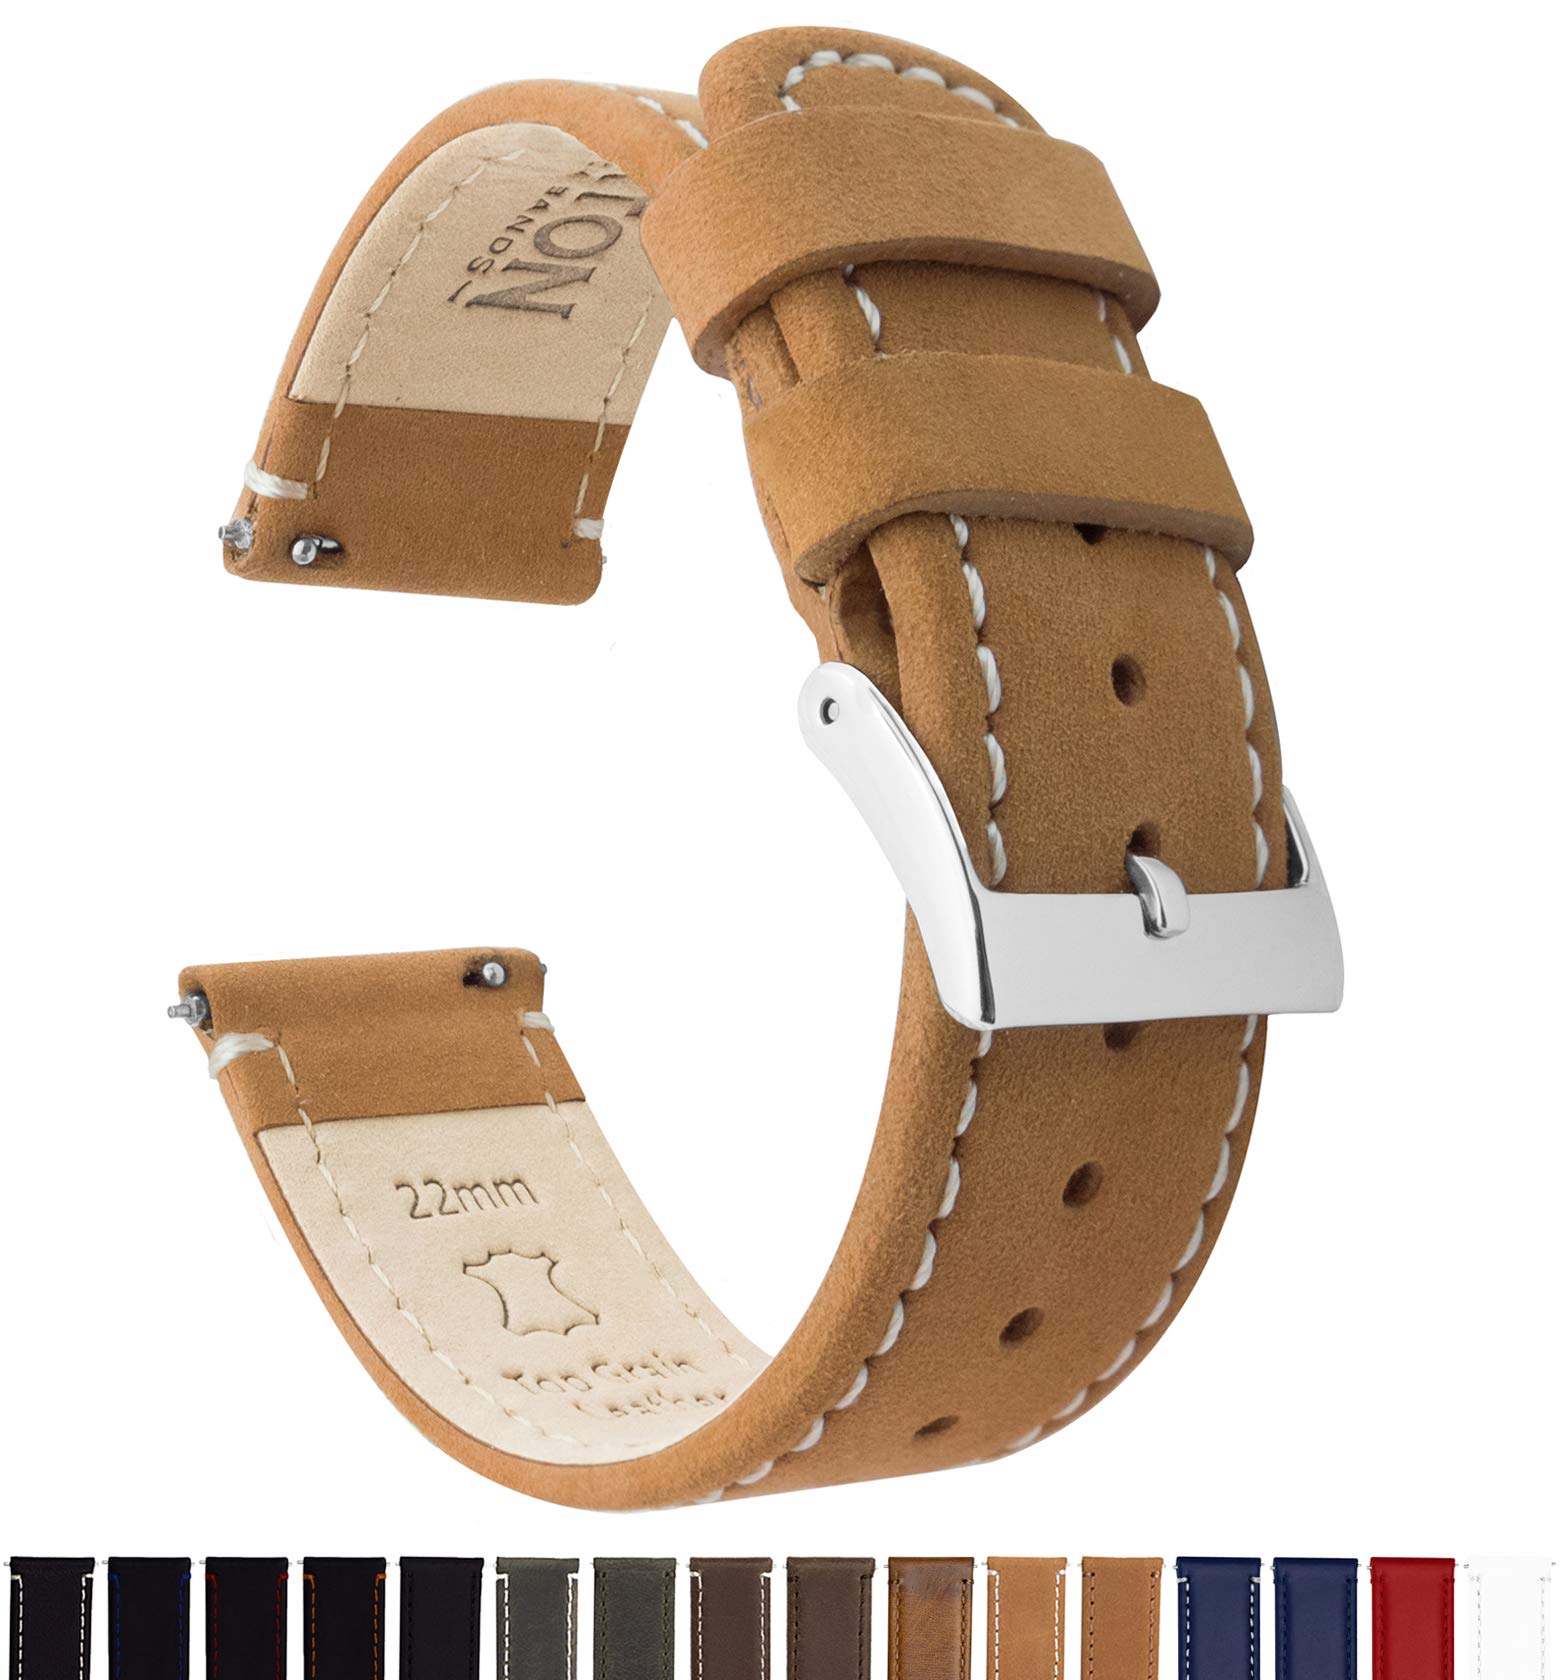 Barton Quick Release - Top Grain Leather Watch Band Strap - Choice of Width - 16mm, 18mm, 19mm, 20mm, 21mm 22mm, 23mm or 24mm